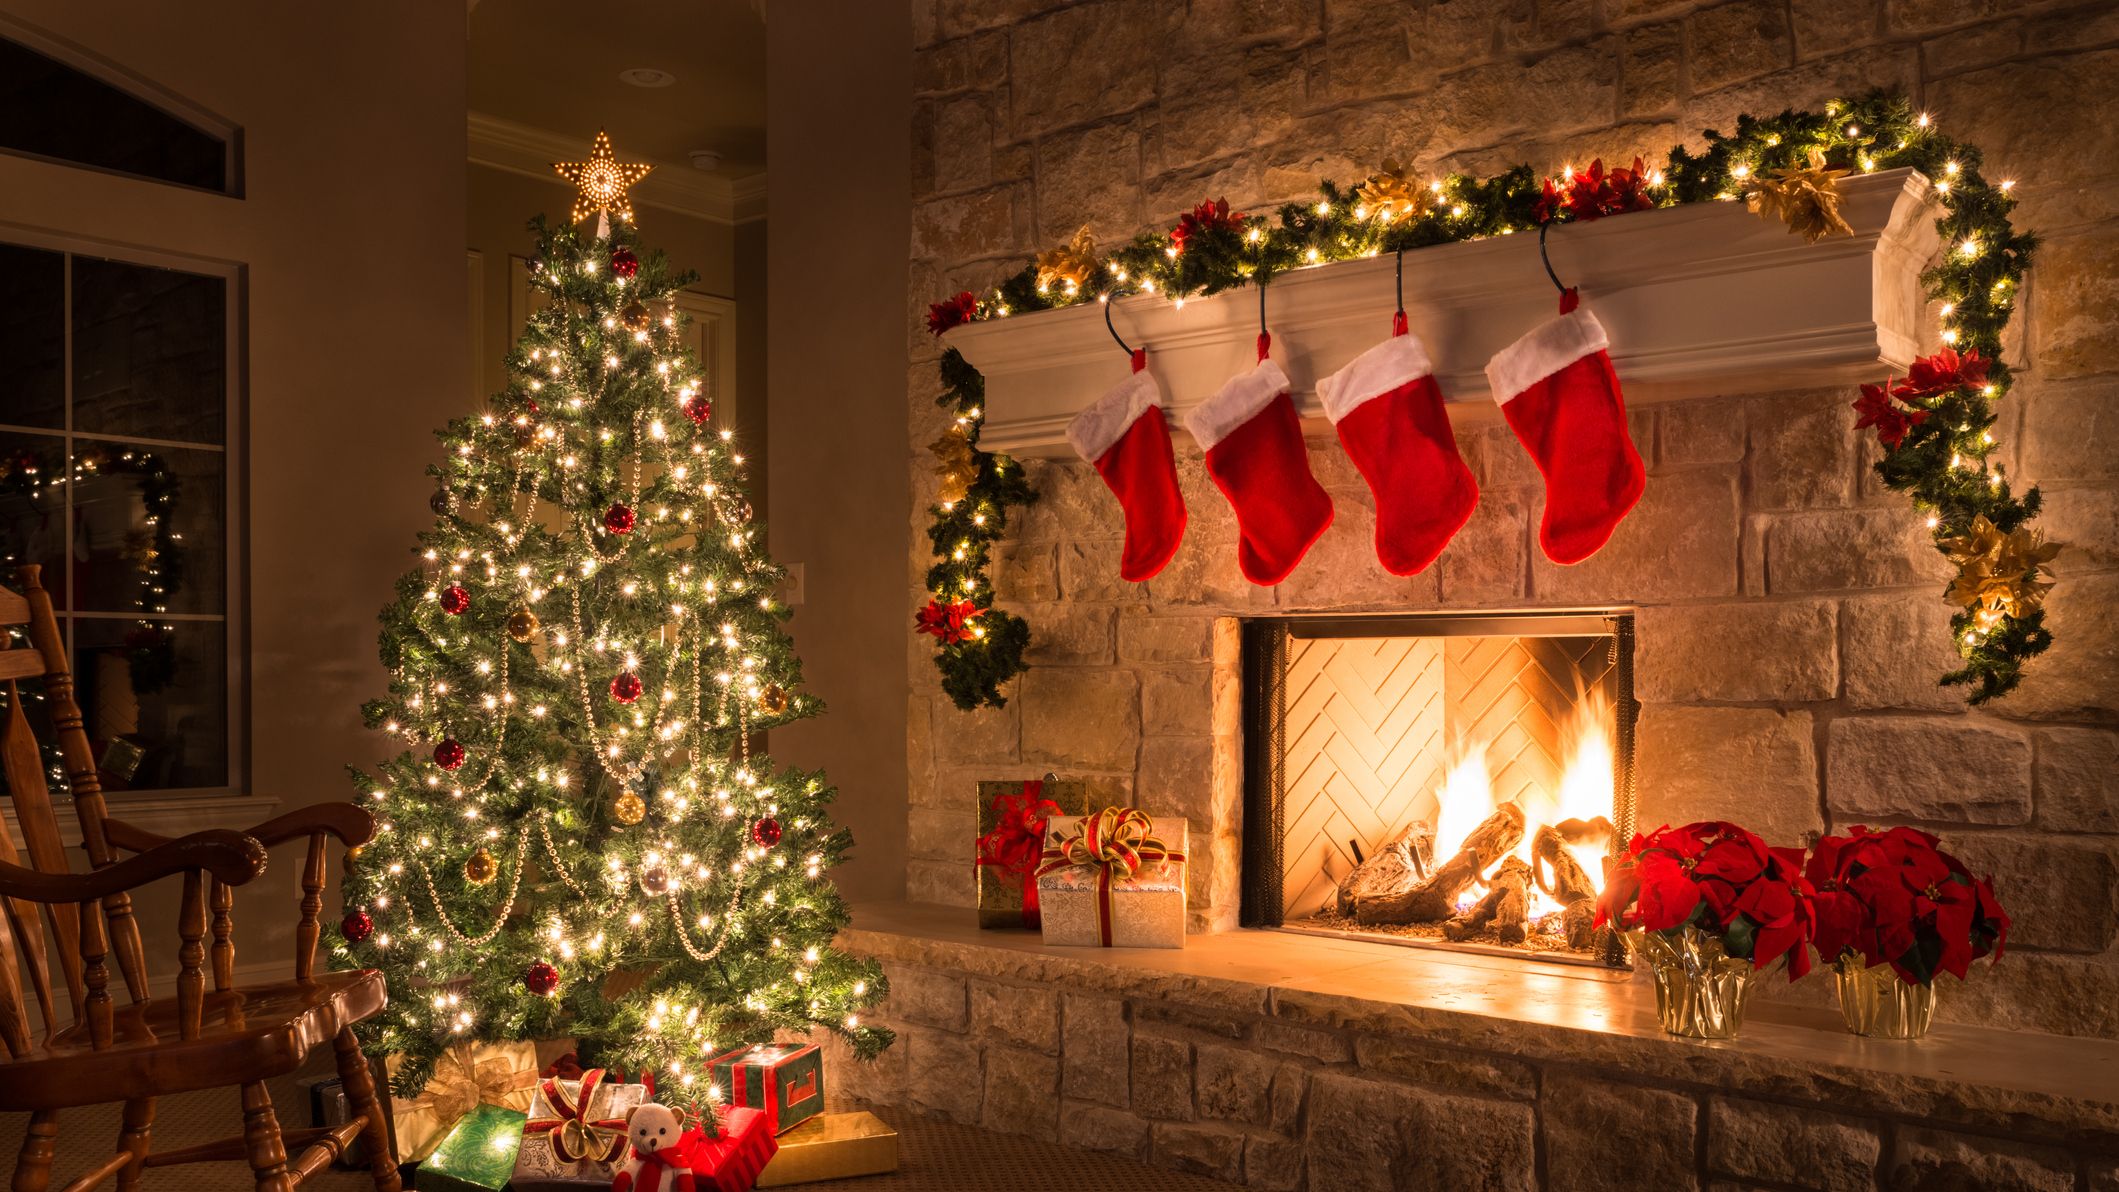 When Should You Put Up Holiday Decorations? This Recent Survey Reveals the  Most Popular Times to Decorate